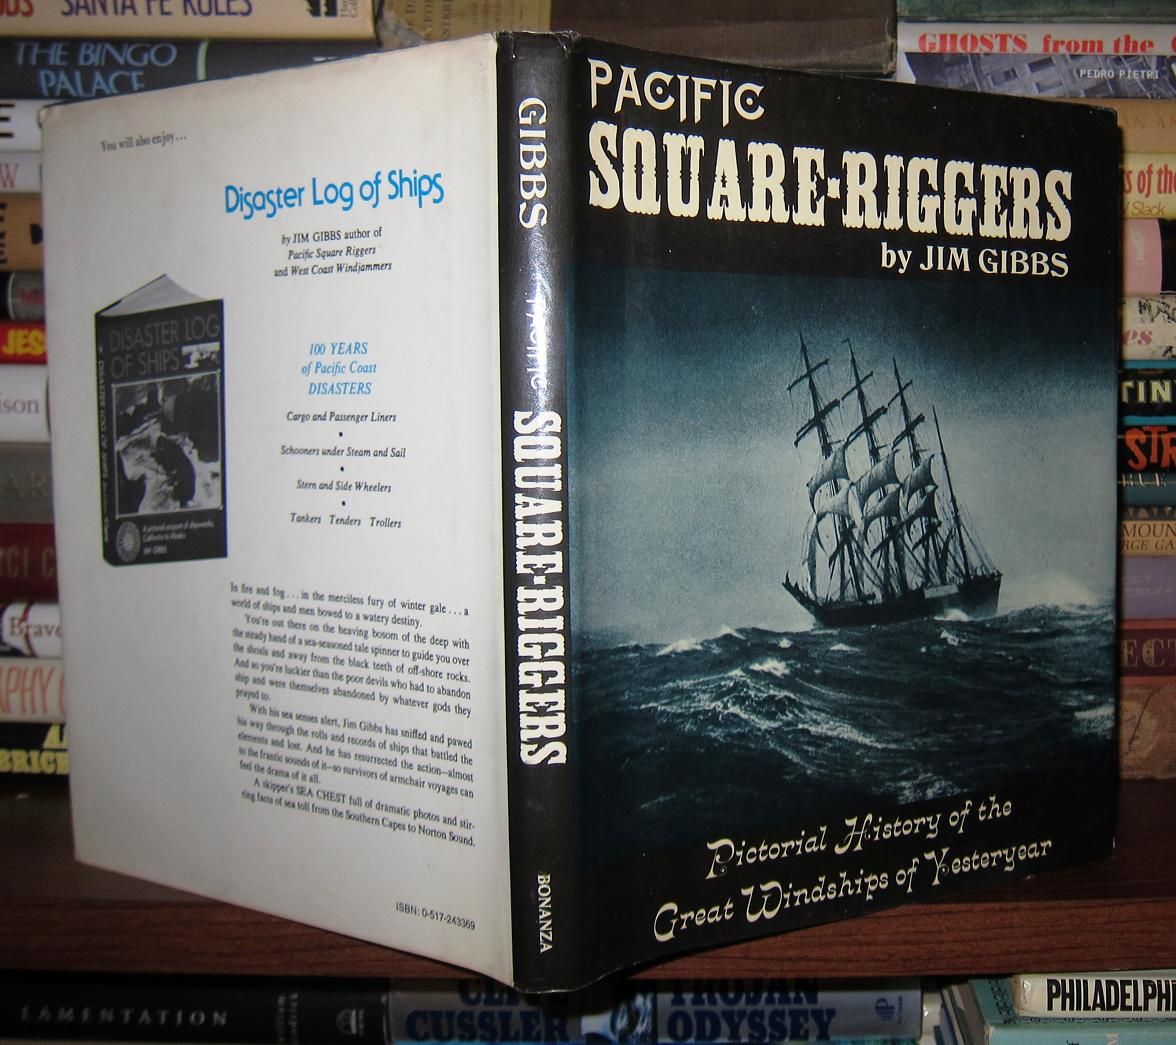 GIBBS, JIM - Pacific Square Riggers Pictorial History of the Great Windships of Yesteryear